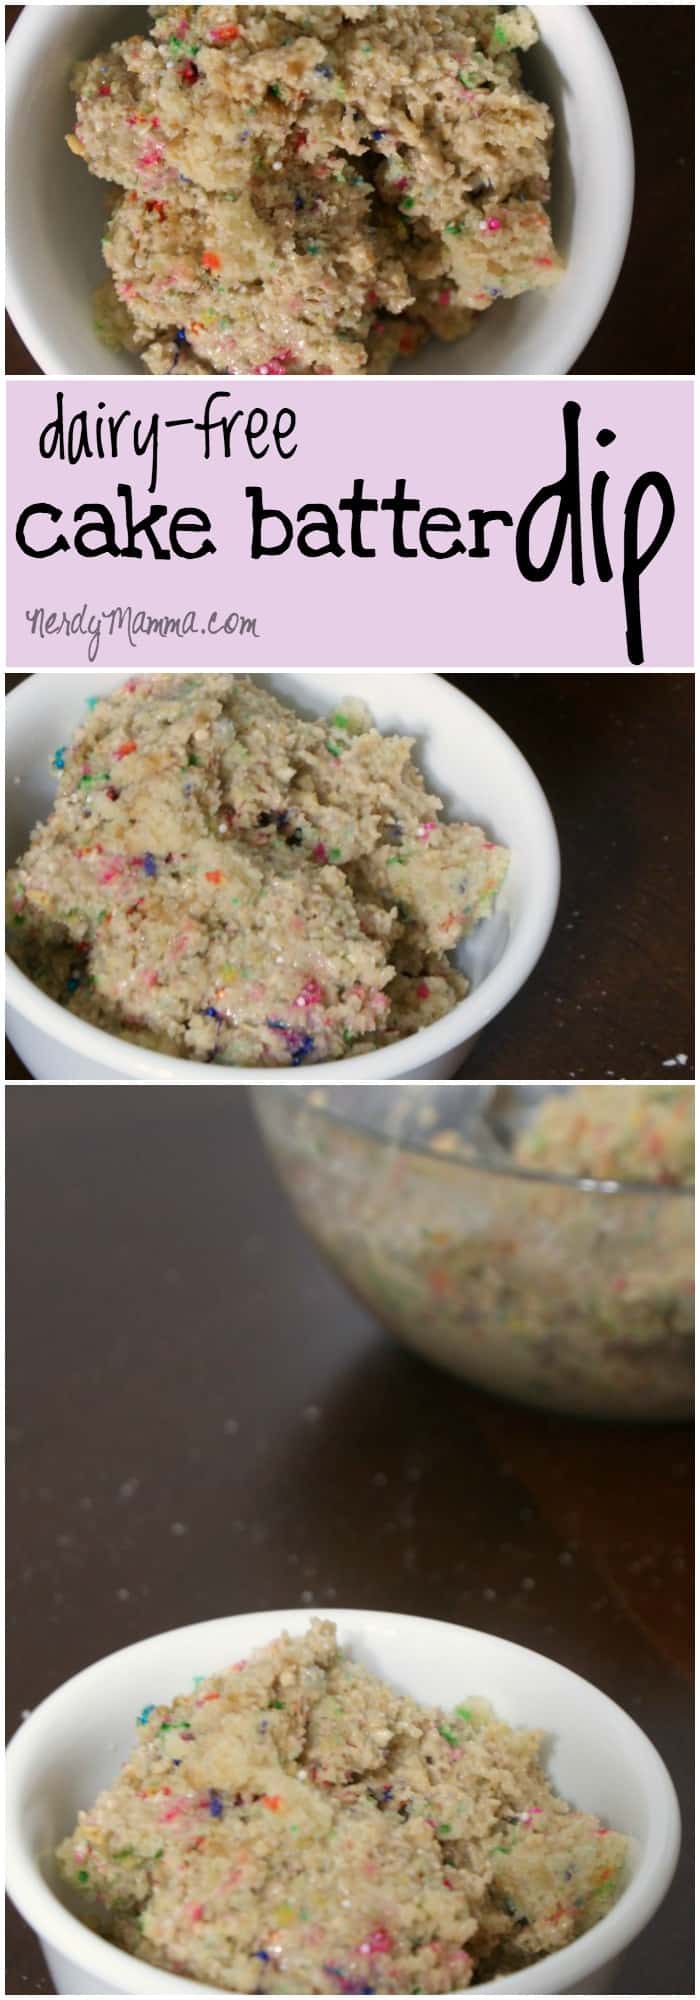 This cake batter dip is so yummy. I can't believe it's dairy-free and egg-free and gluten-free. Just awesome. And SO yummy!